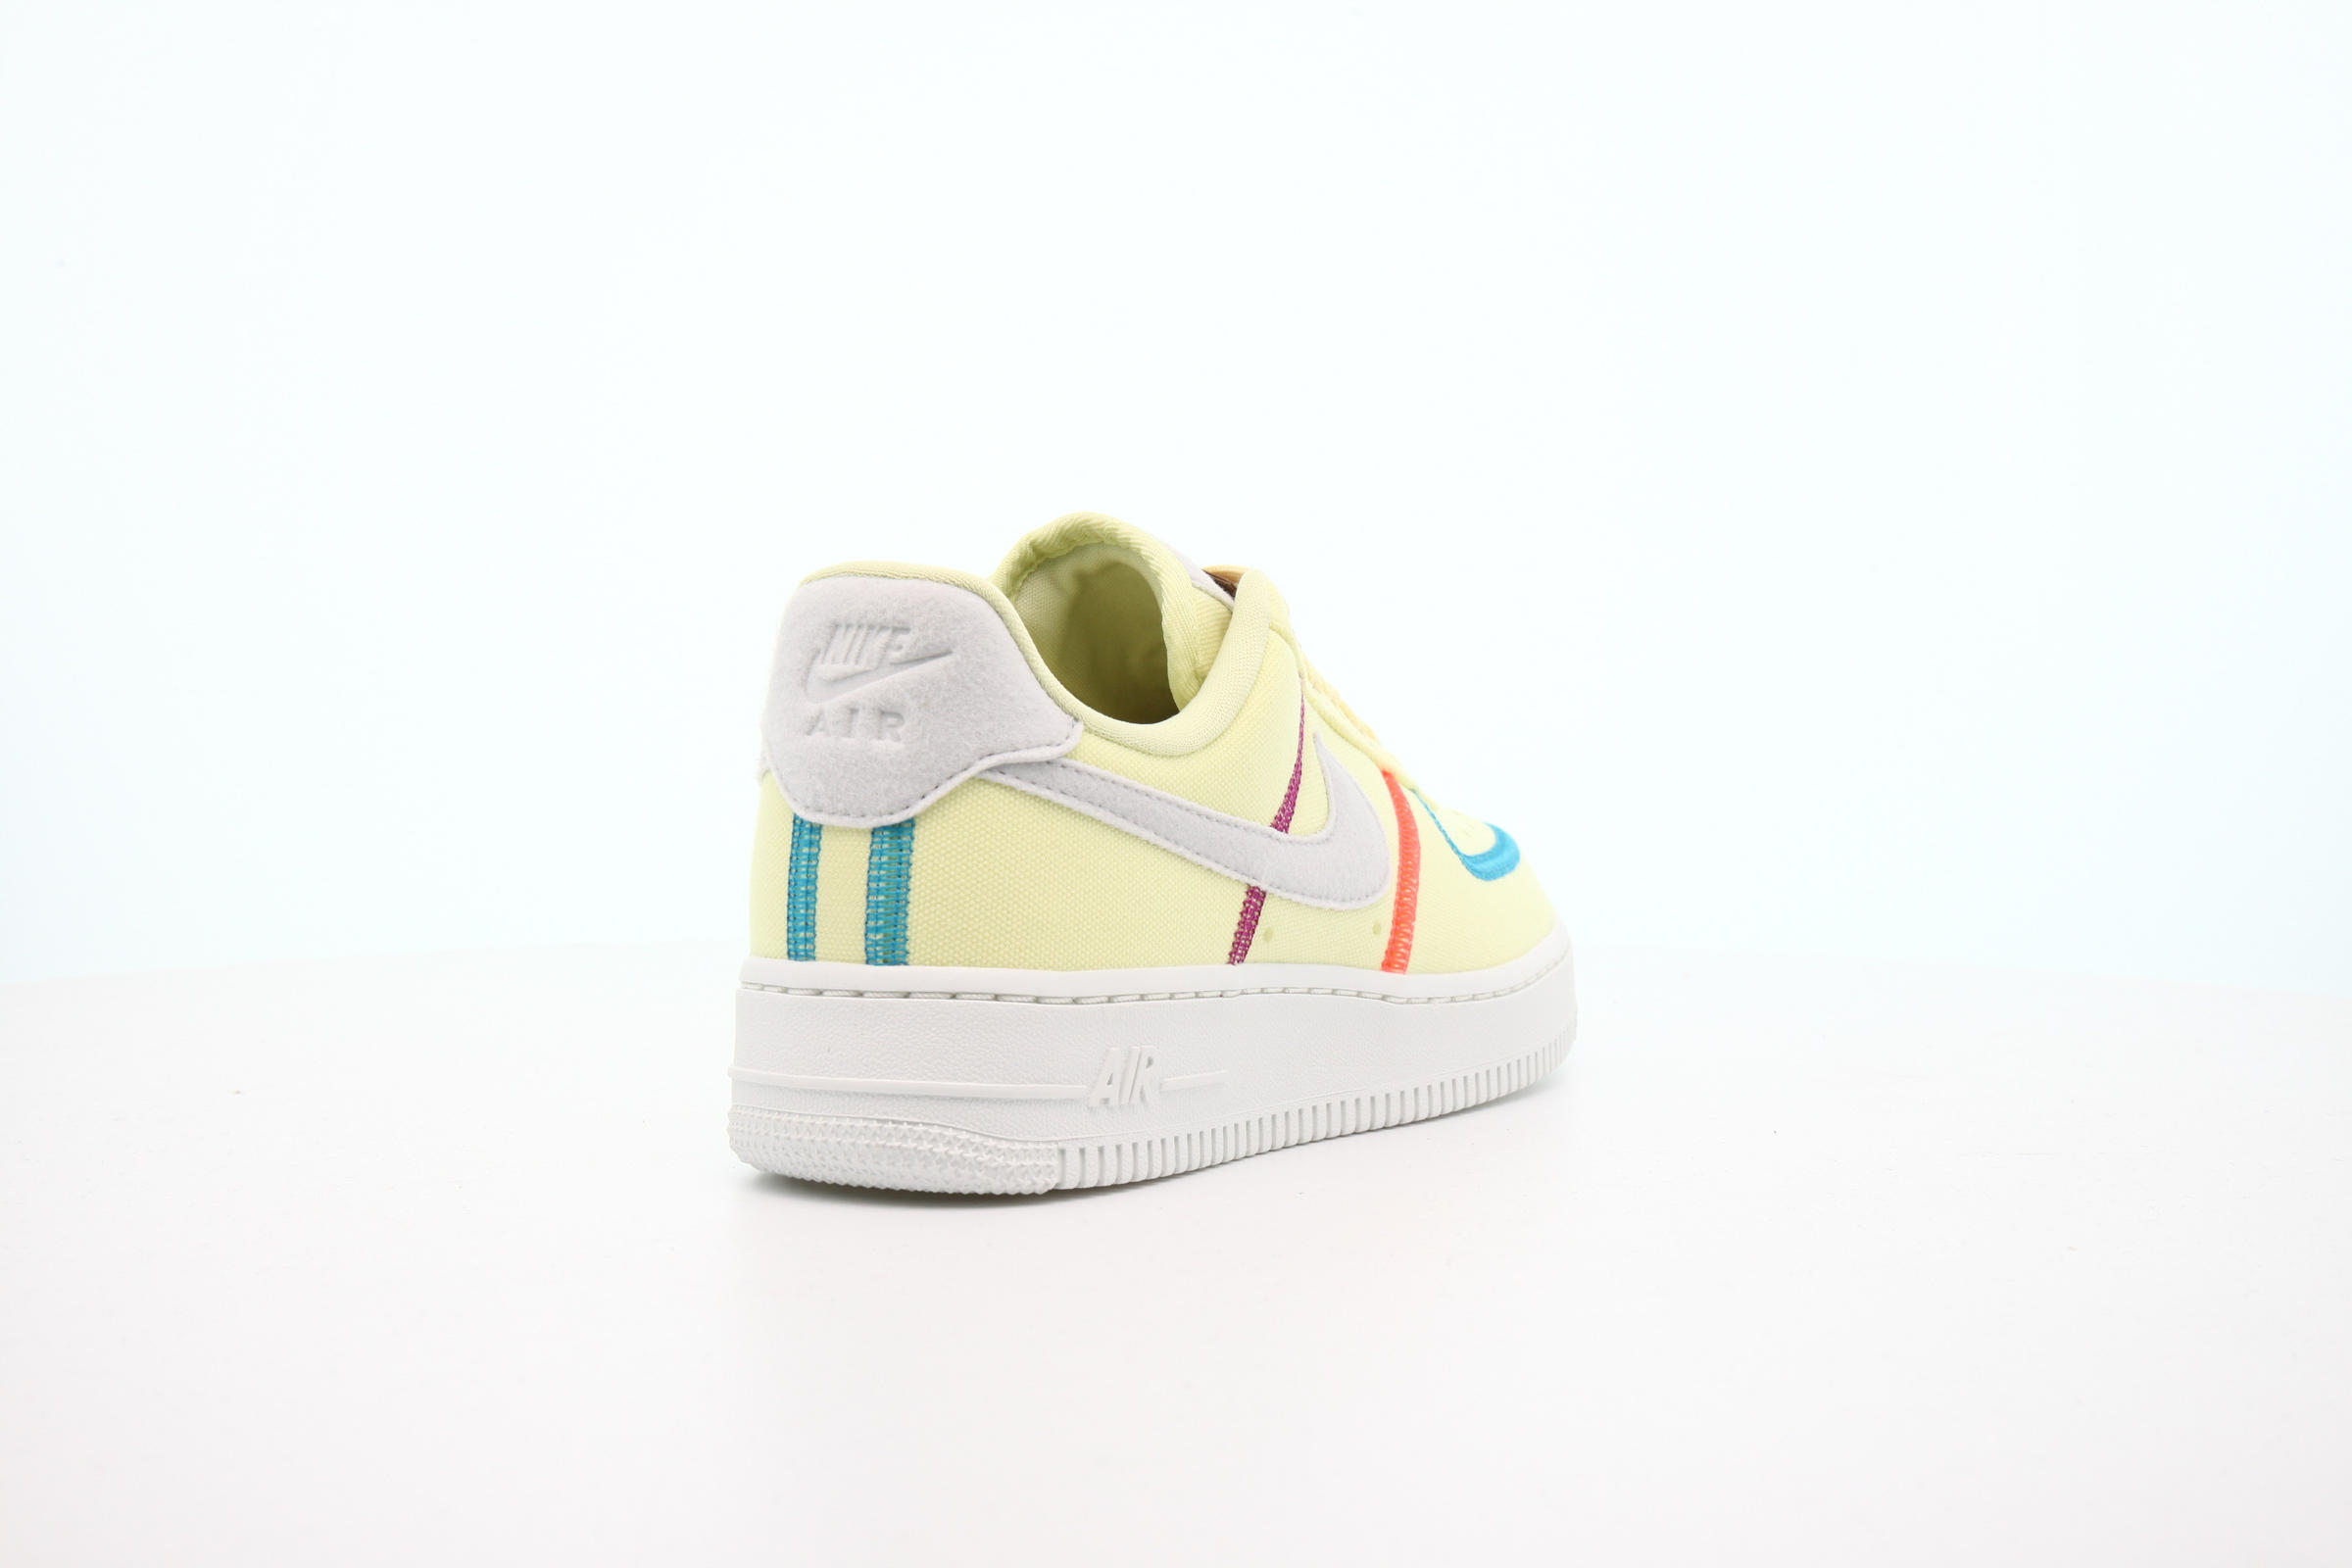 Nike WMNS AIR FORCE 1 '07 LX "LIFE LIME"